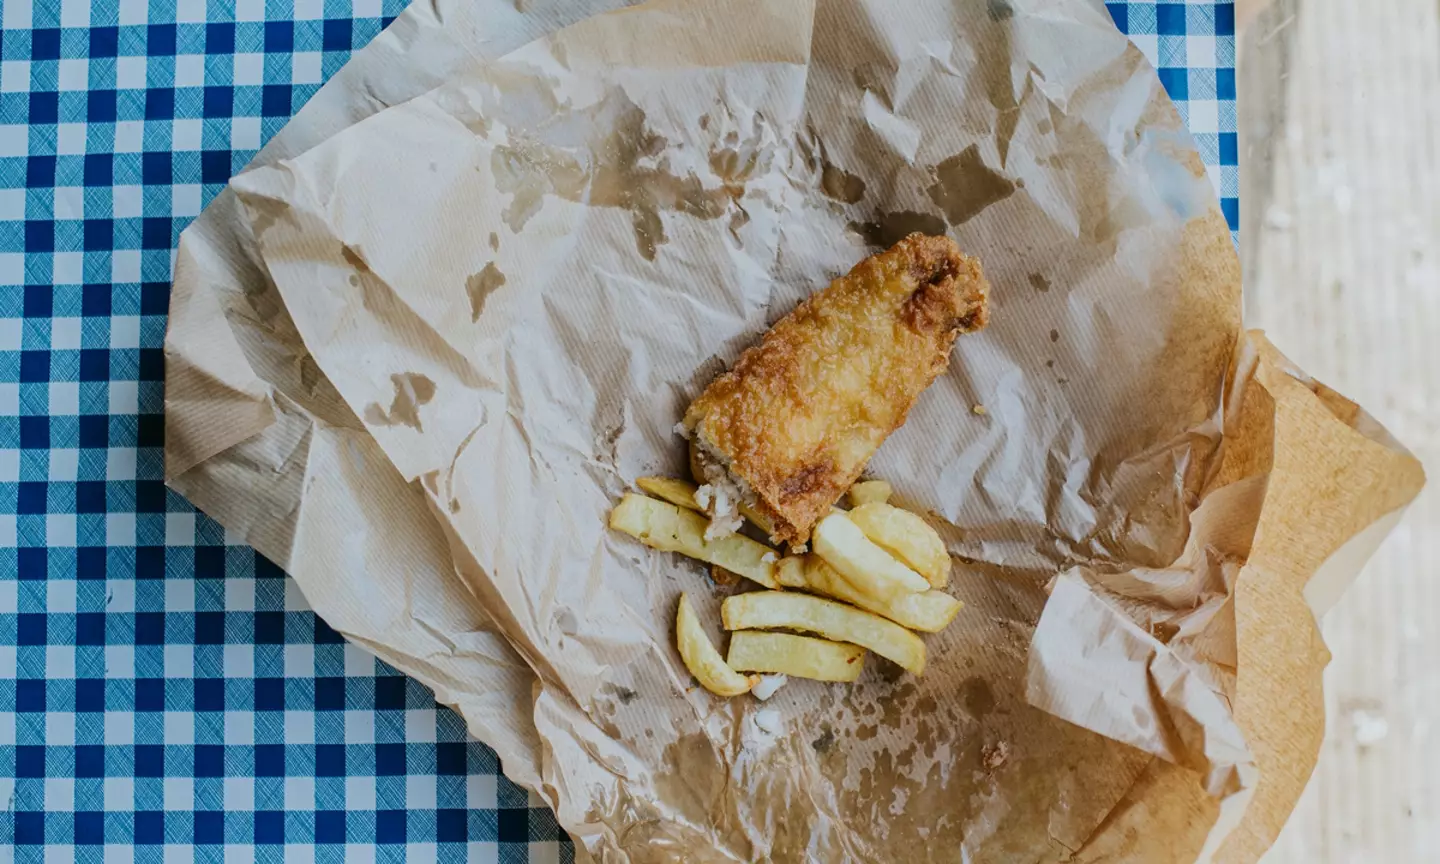 British fish and chip shops are hiding a secret.